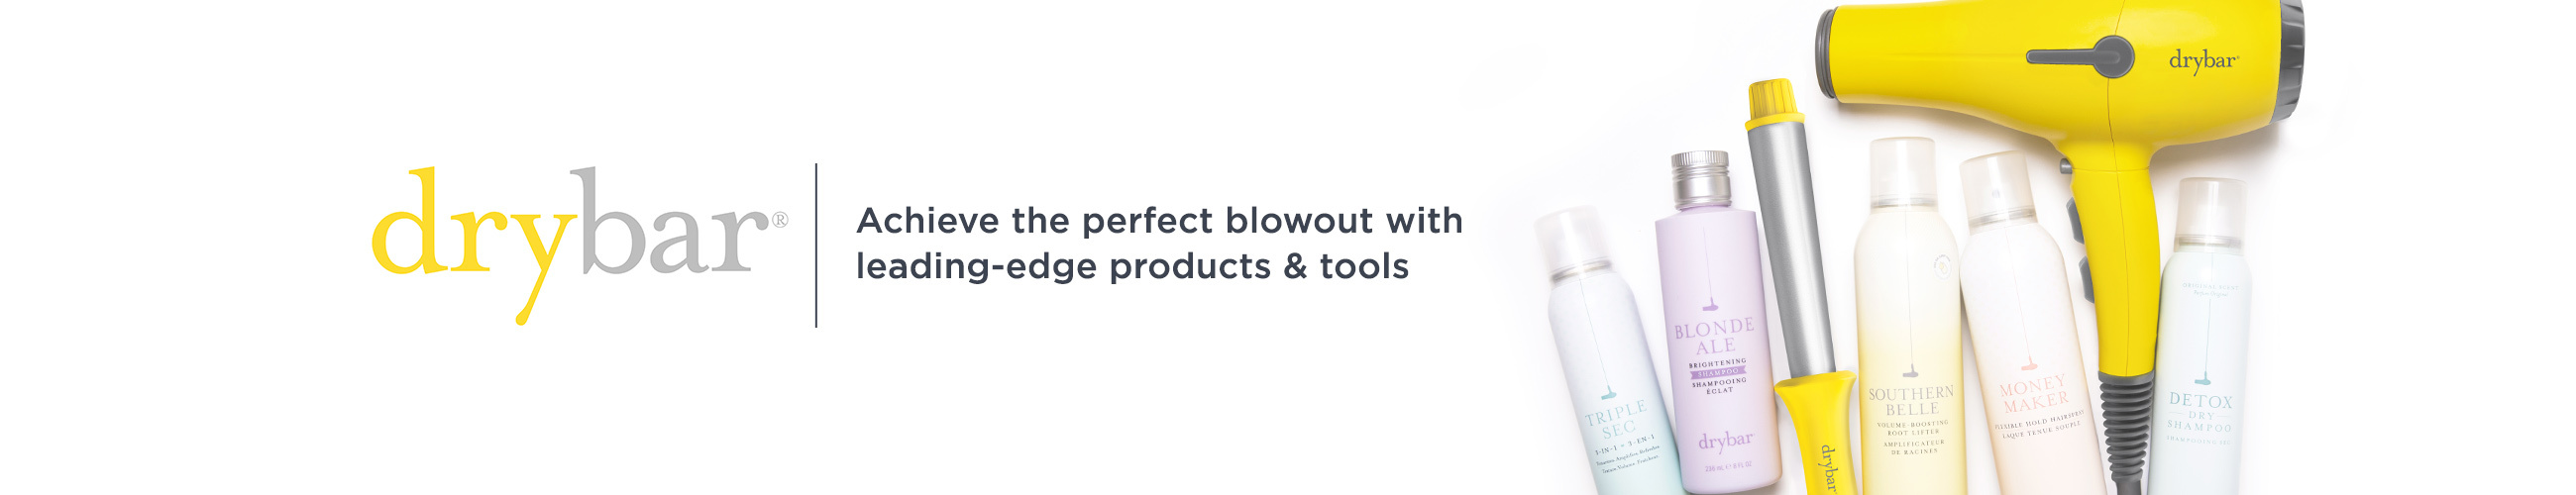 Drybar, Achieve the perfect blowout with leading-edge products & tools